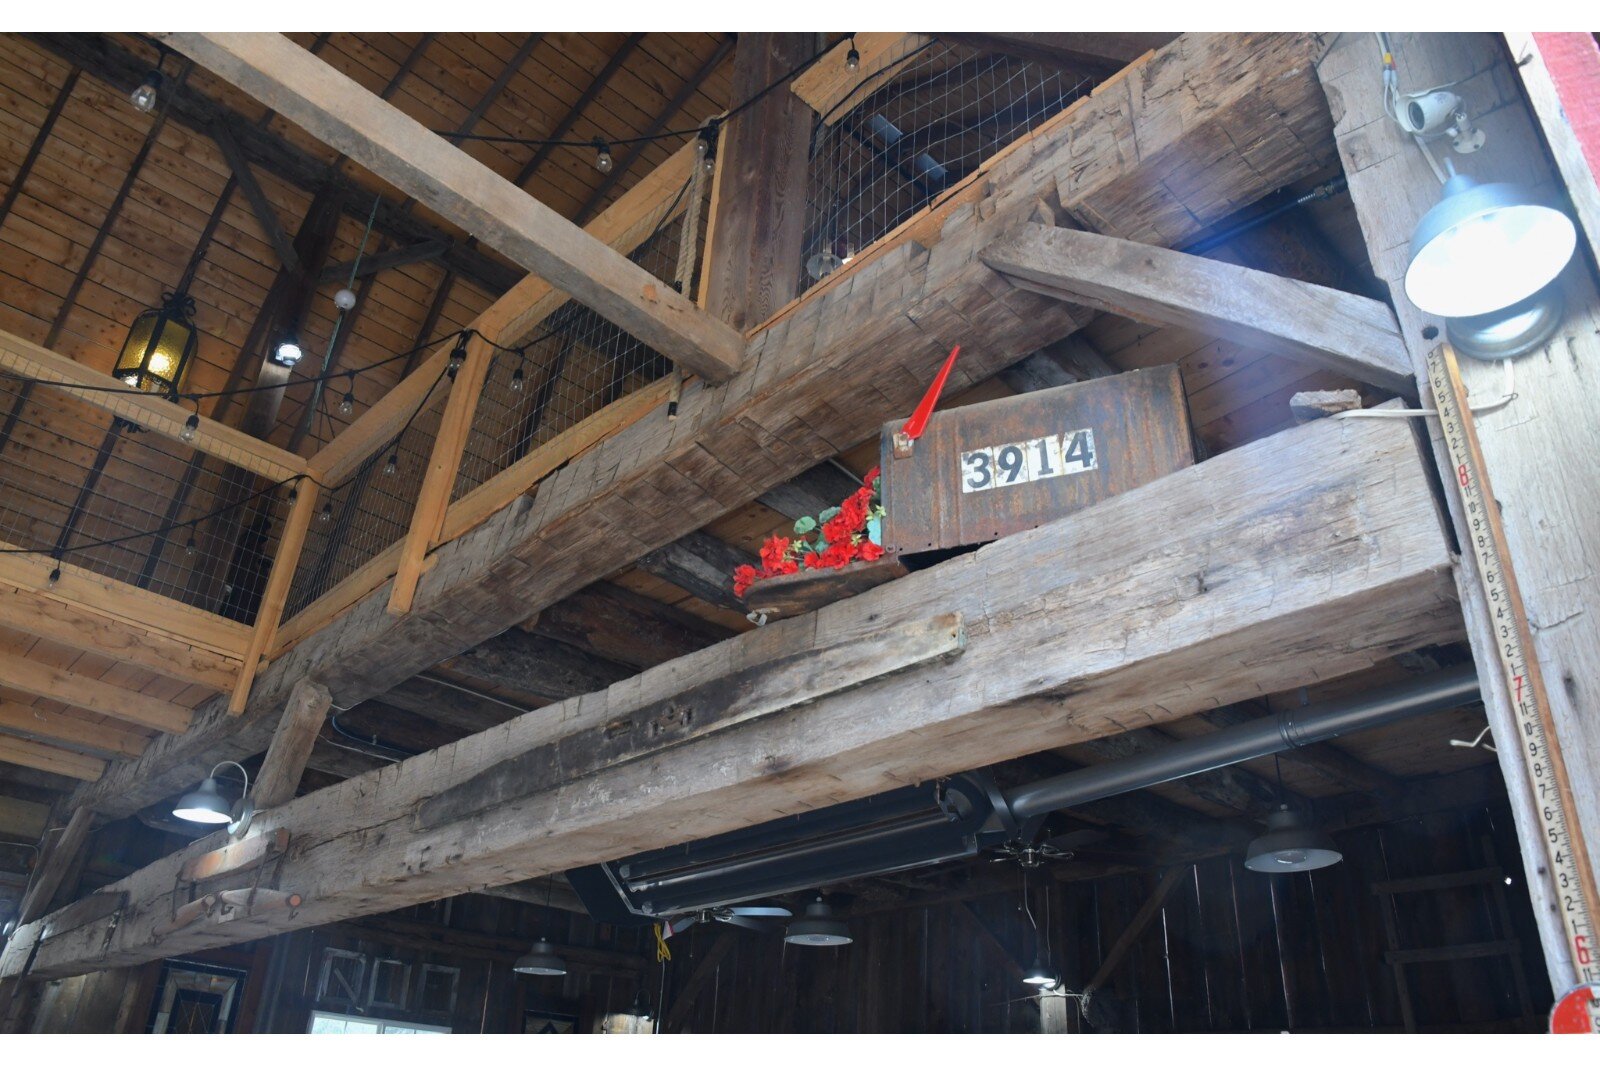 Interior views of the barn at Peaceful Valley Farm.